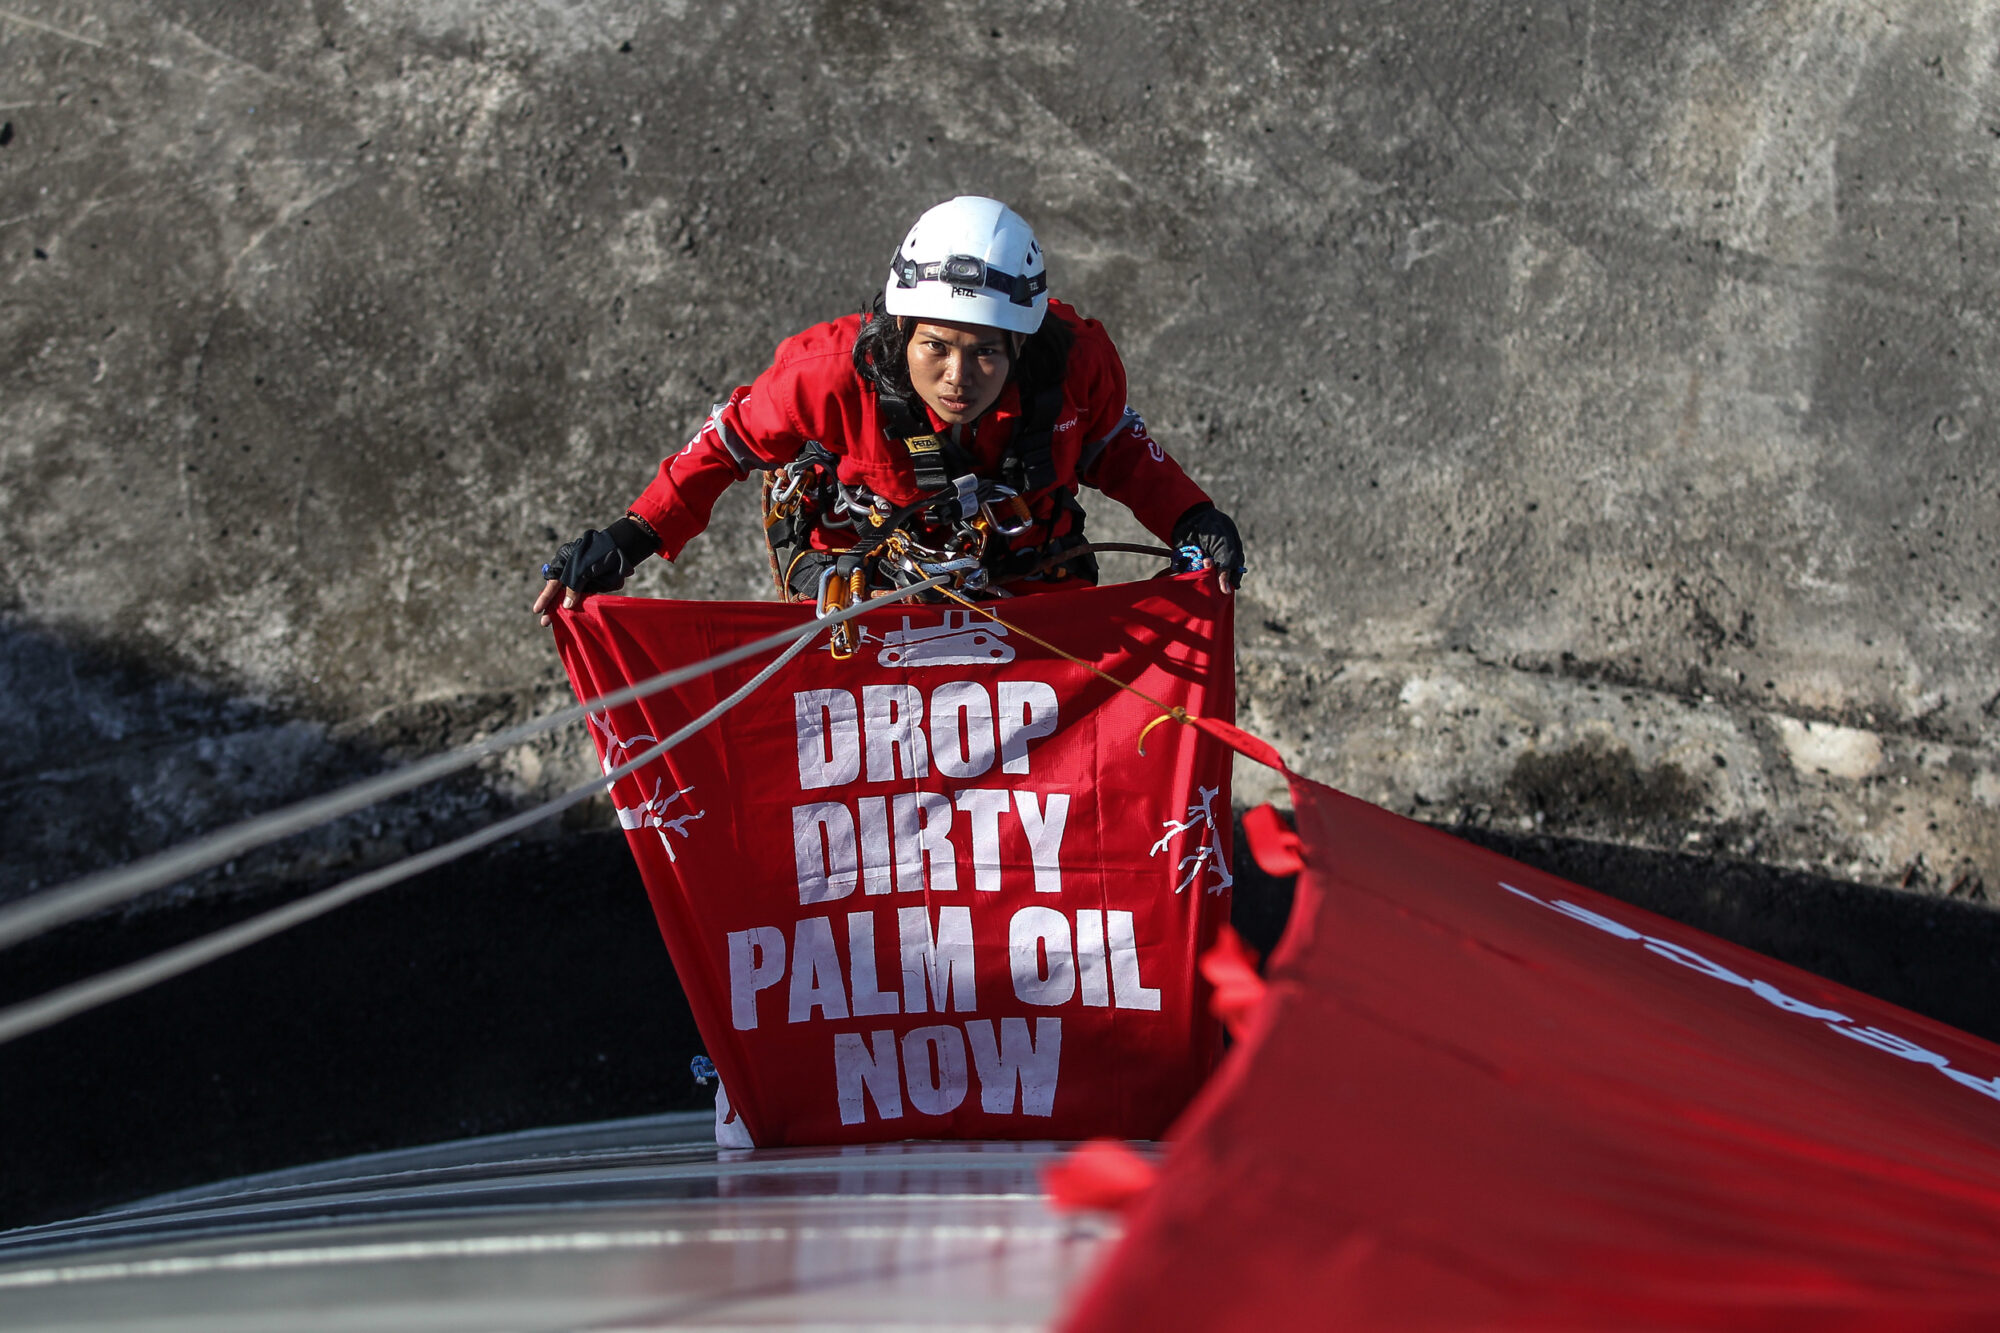 Activist holding banner saying "Drop dirty palm oil now"